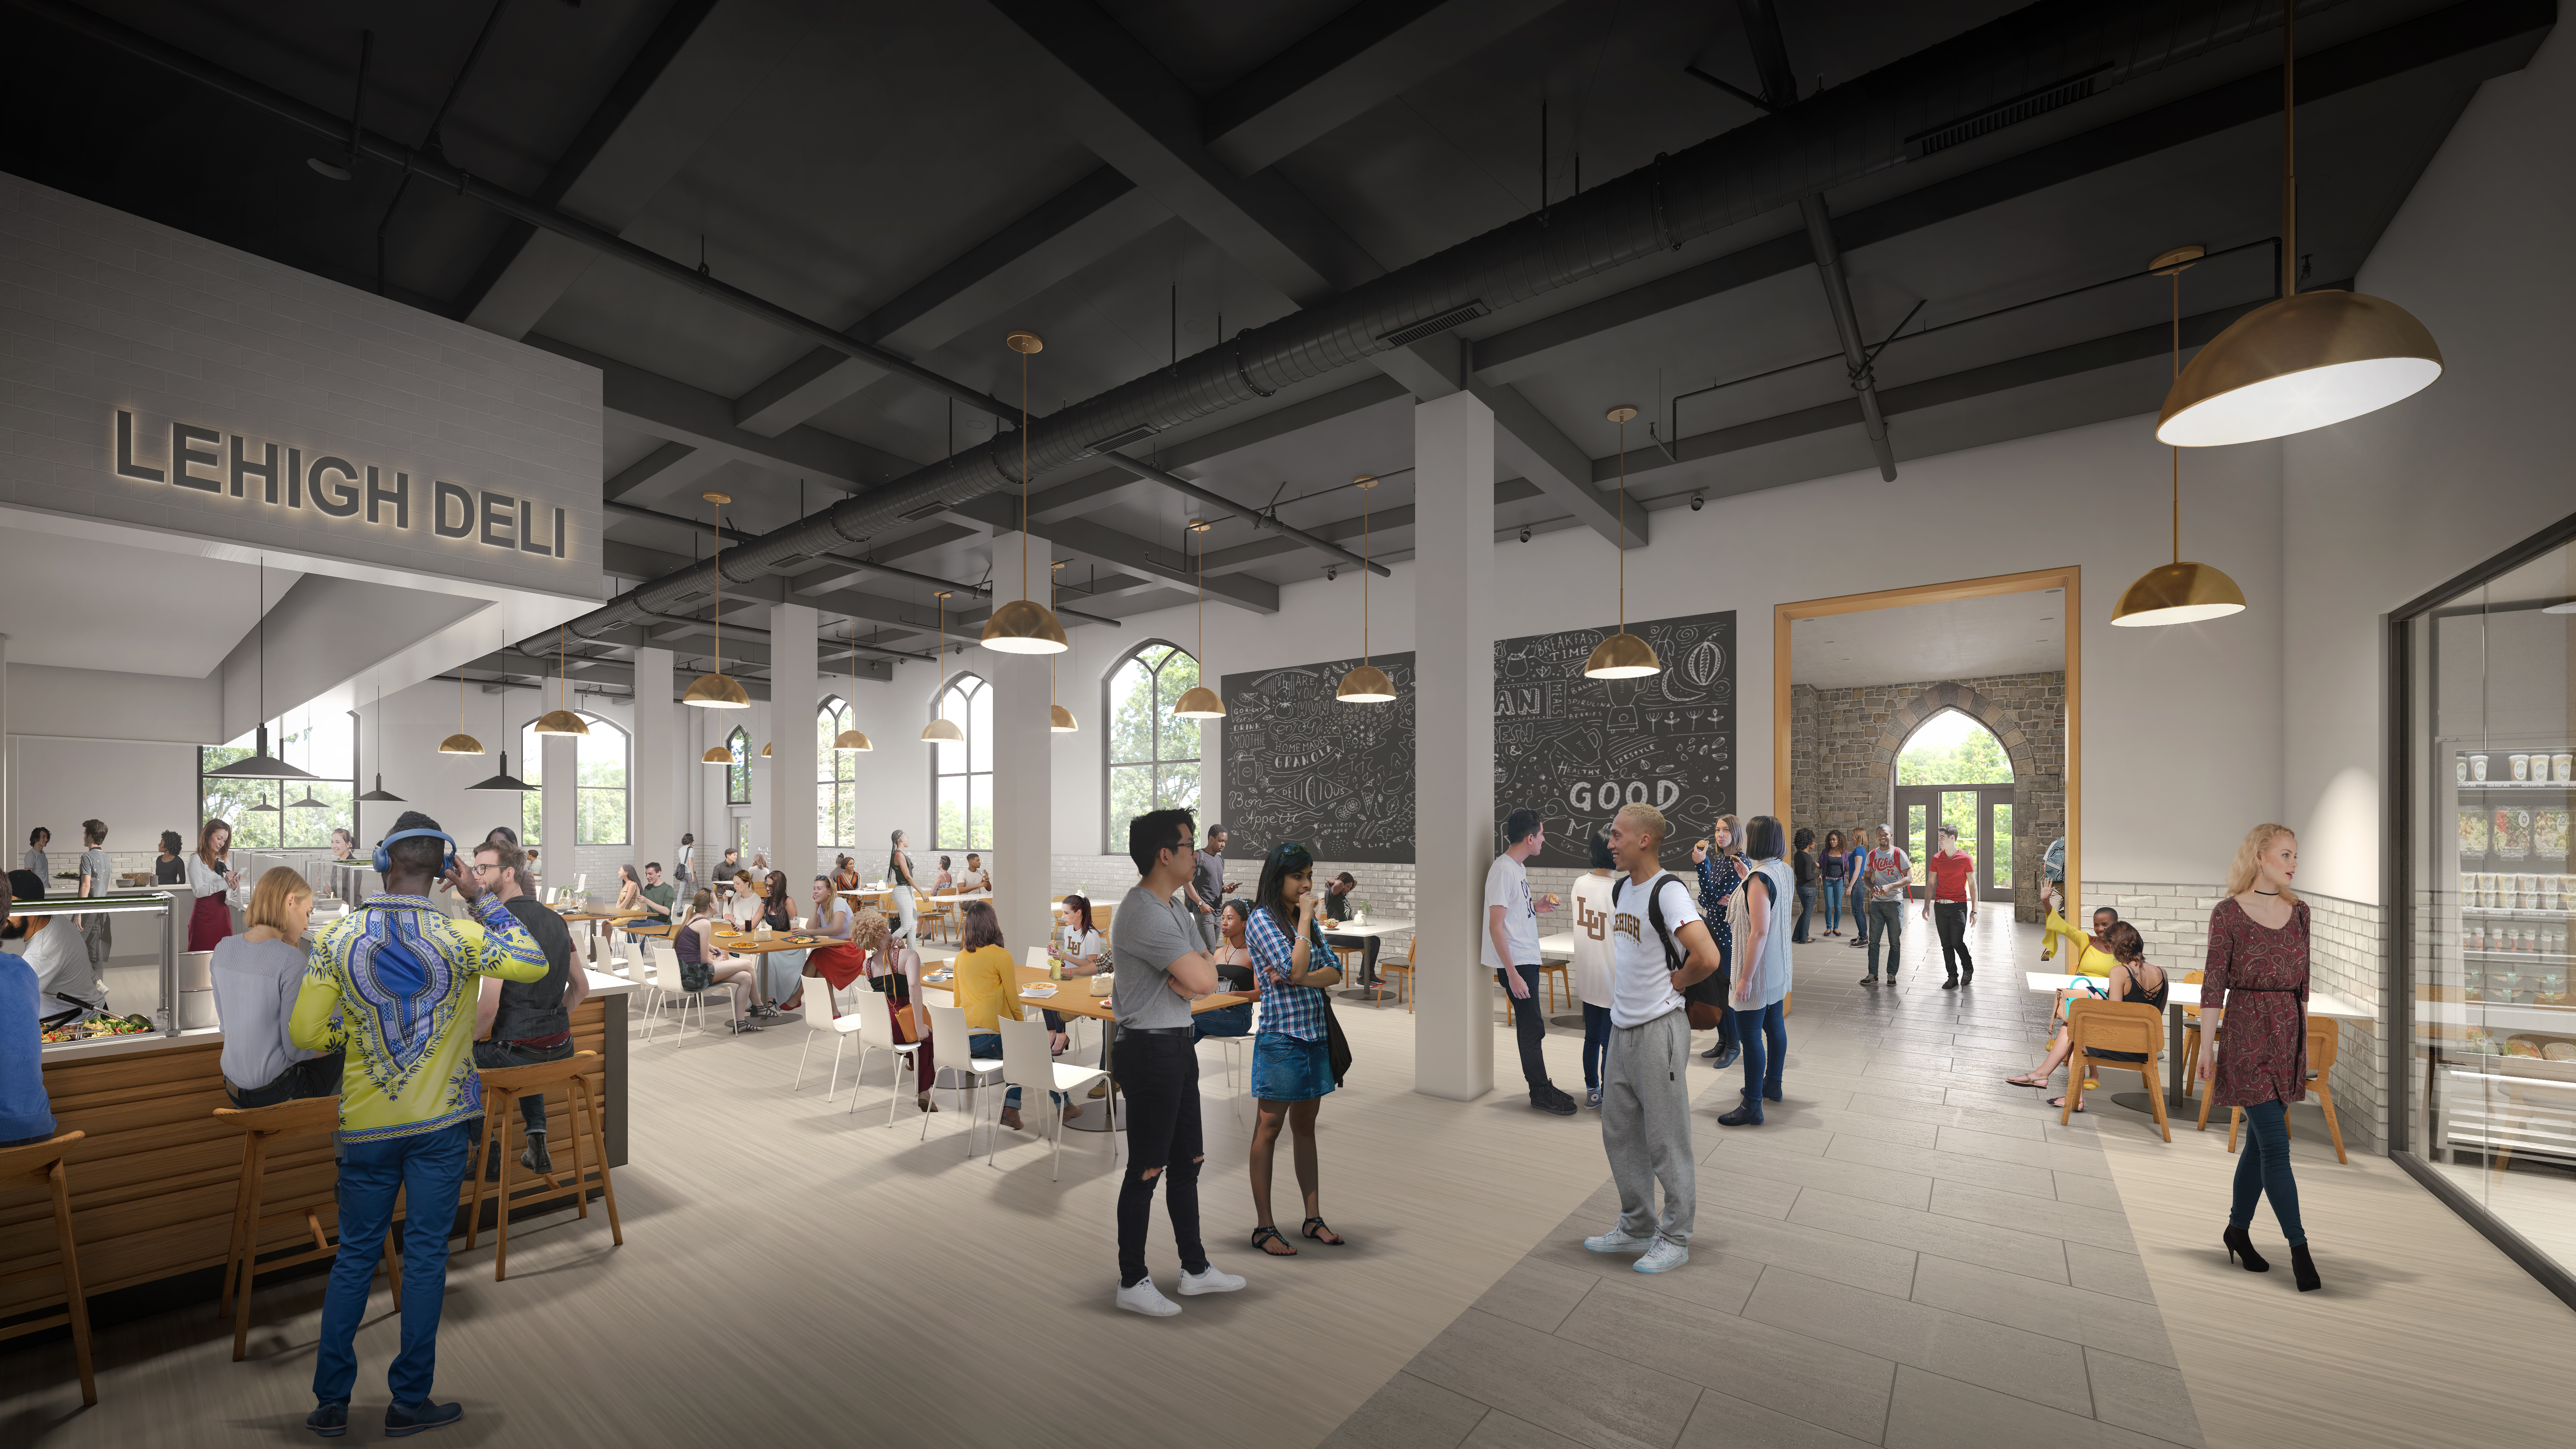 An architectural rendering of the Lower Eatery within the newly Renovated Clayton University Center